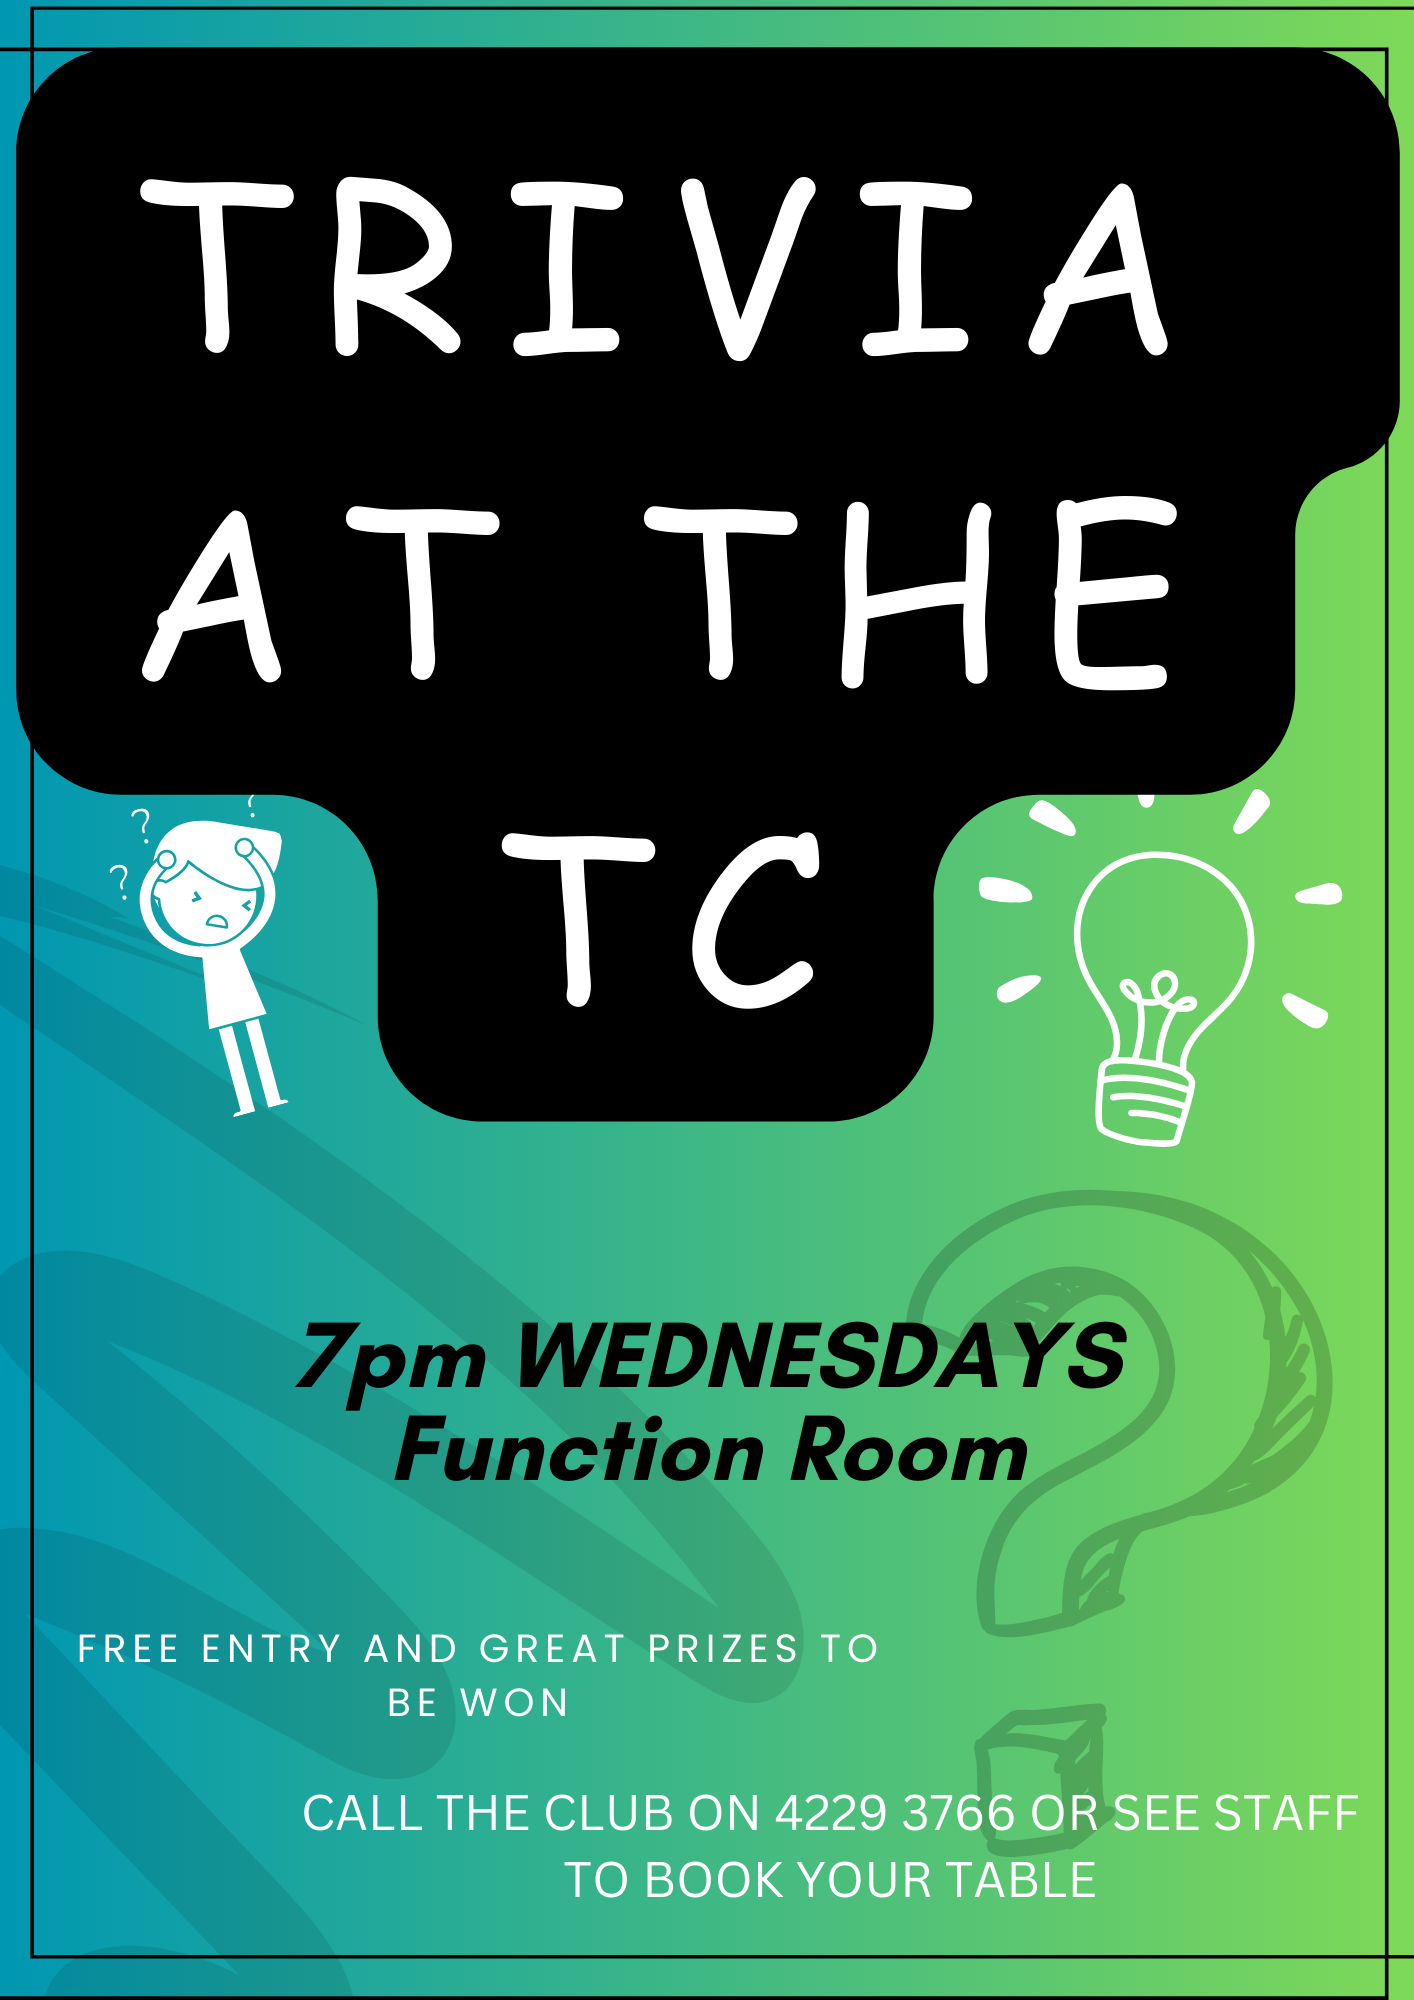 Trivia Night - Events in Wollongong